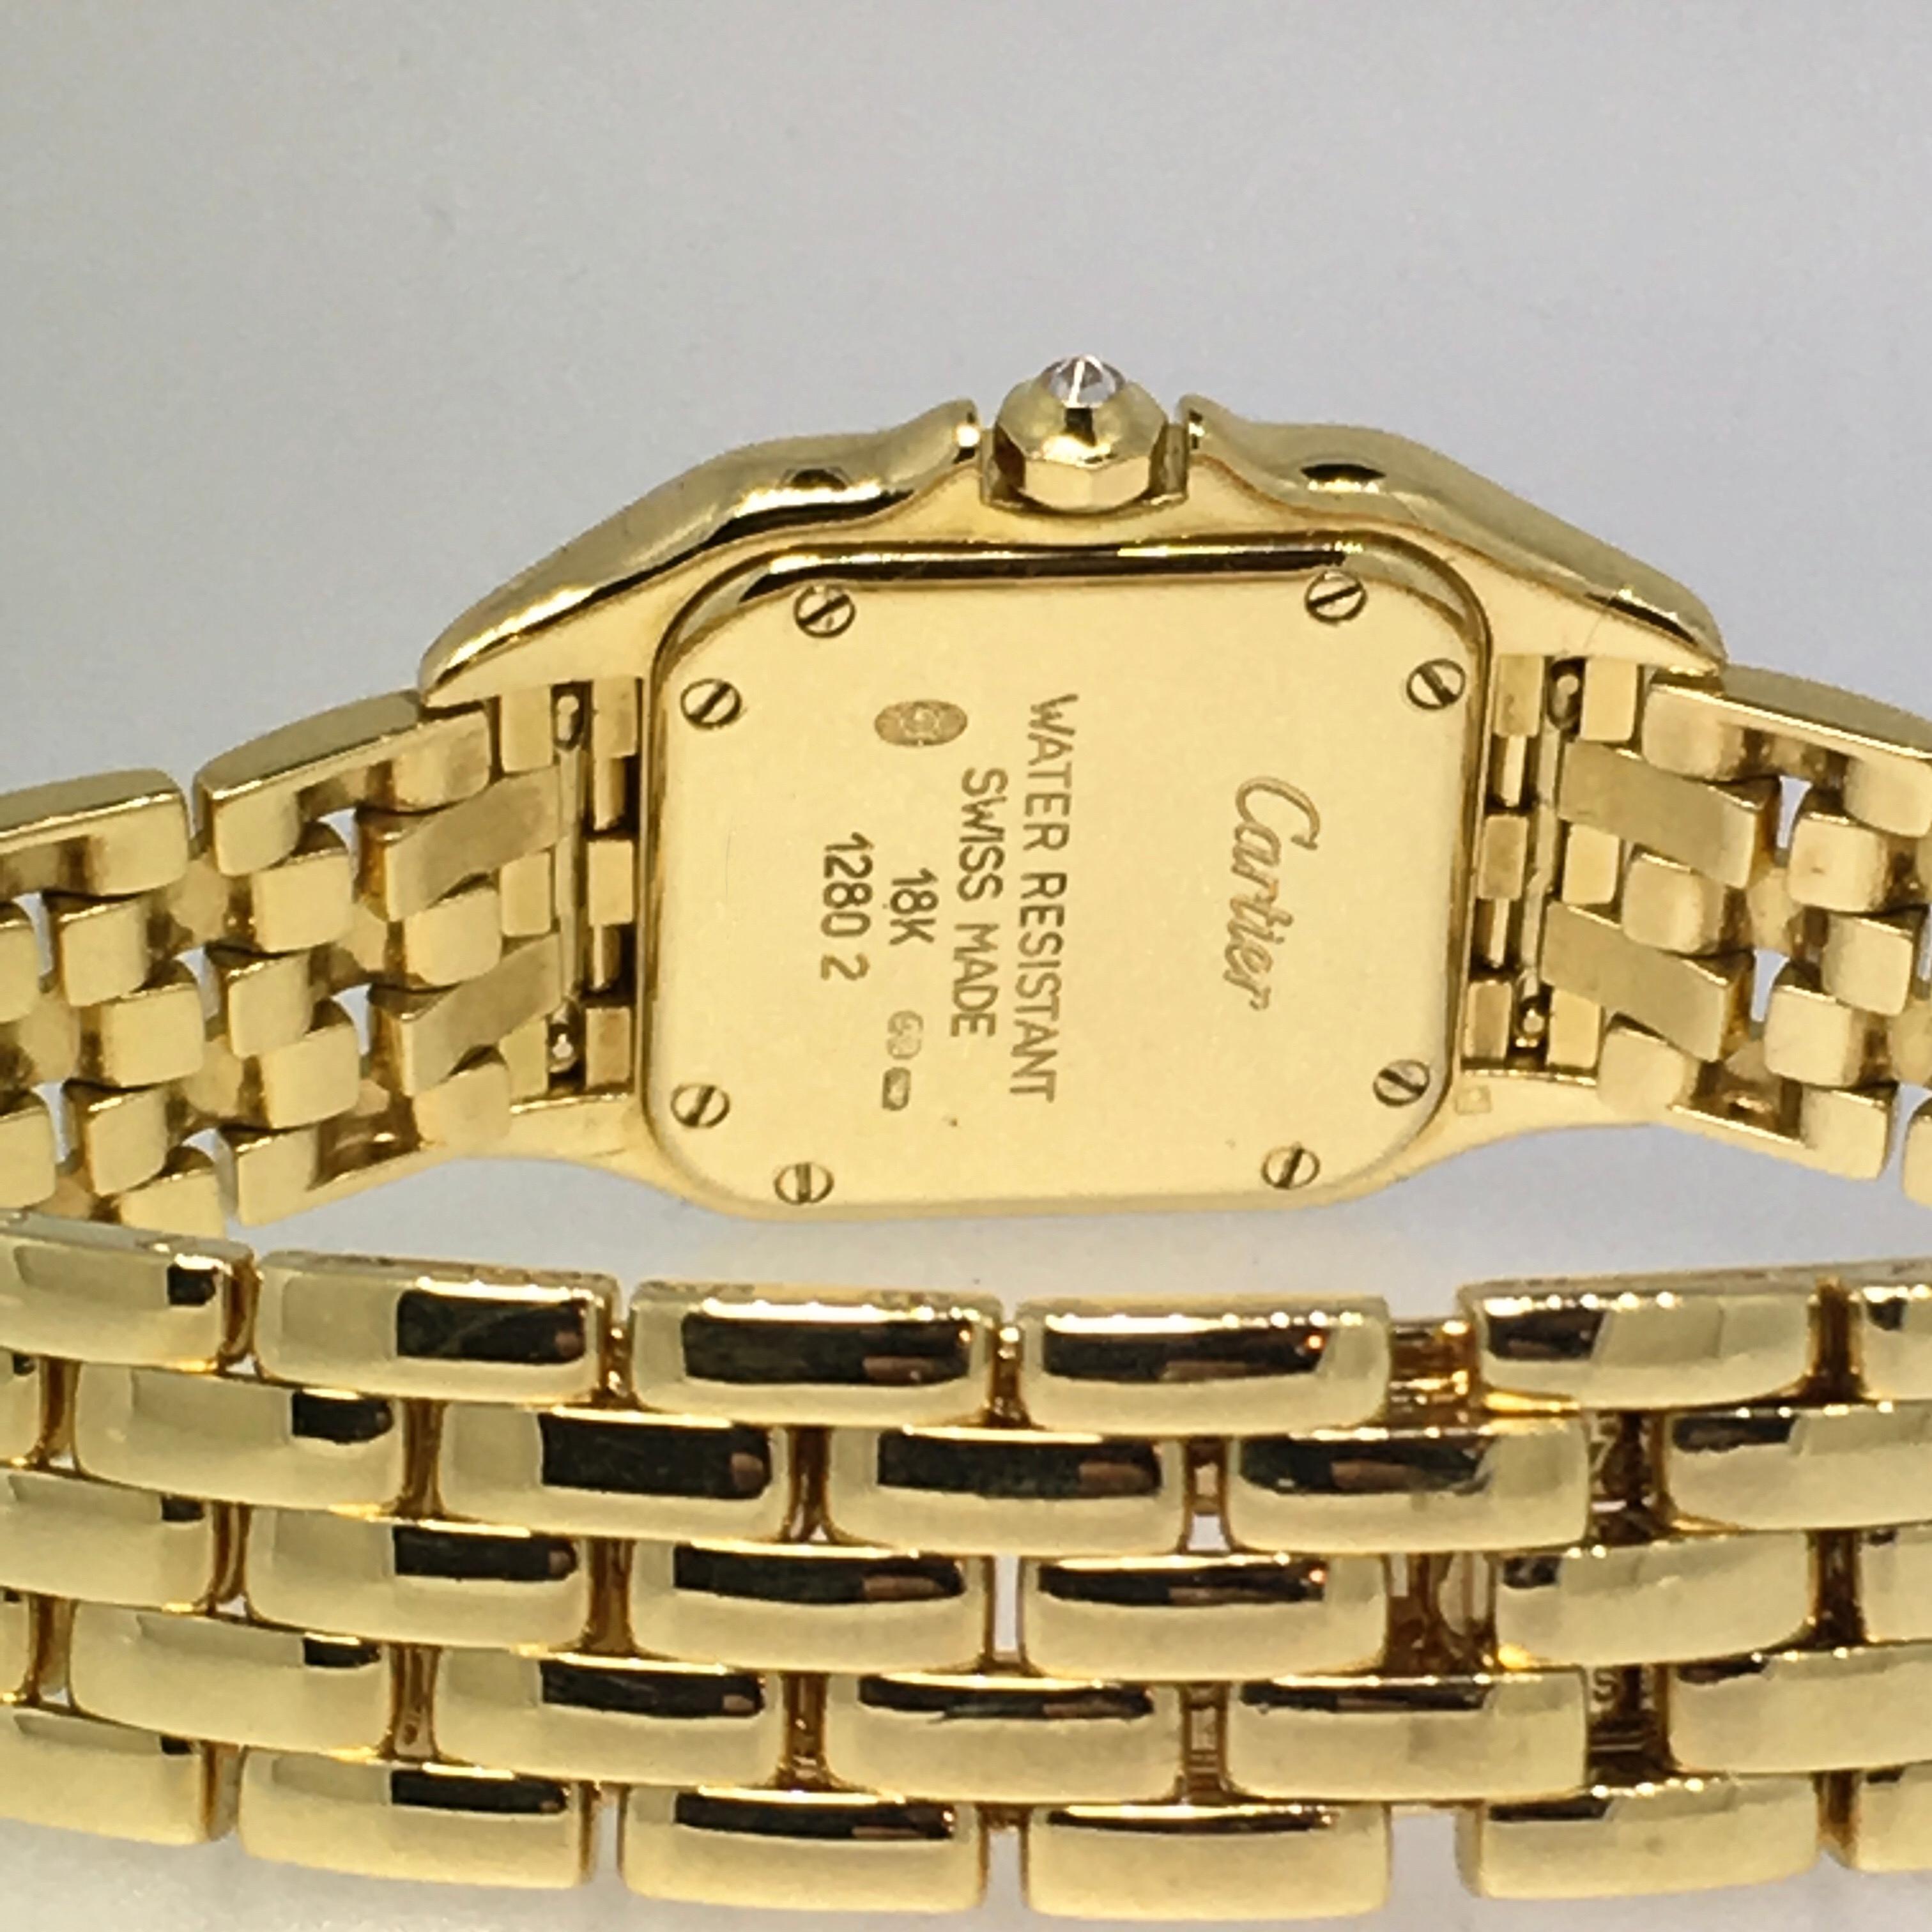 Cartier Panthère, Yellow Gold, Diamonds, Reference 1280-2, Mint Condition 1